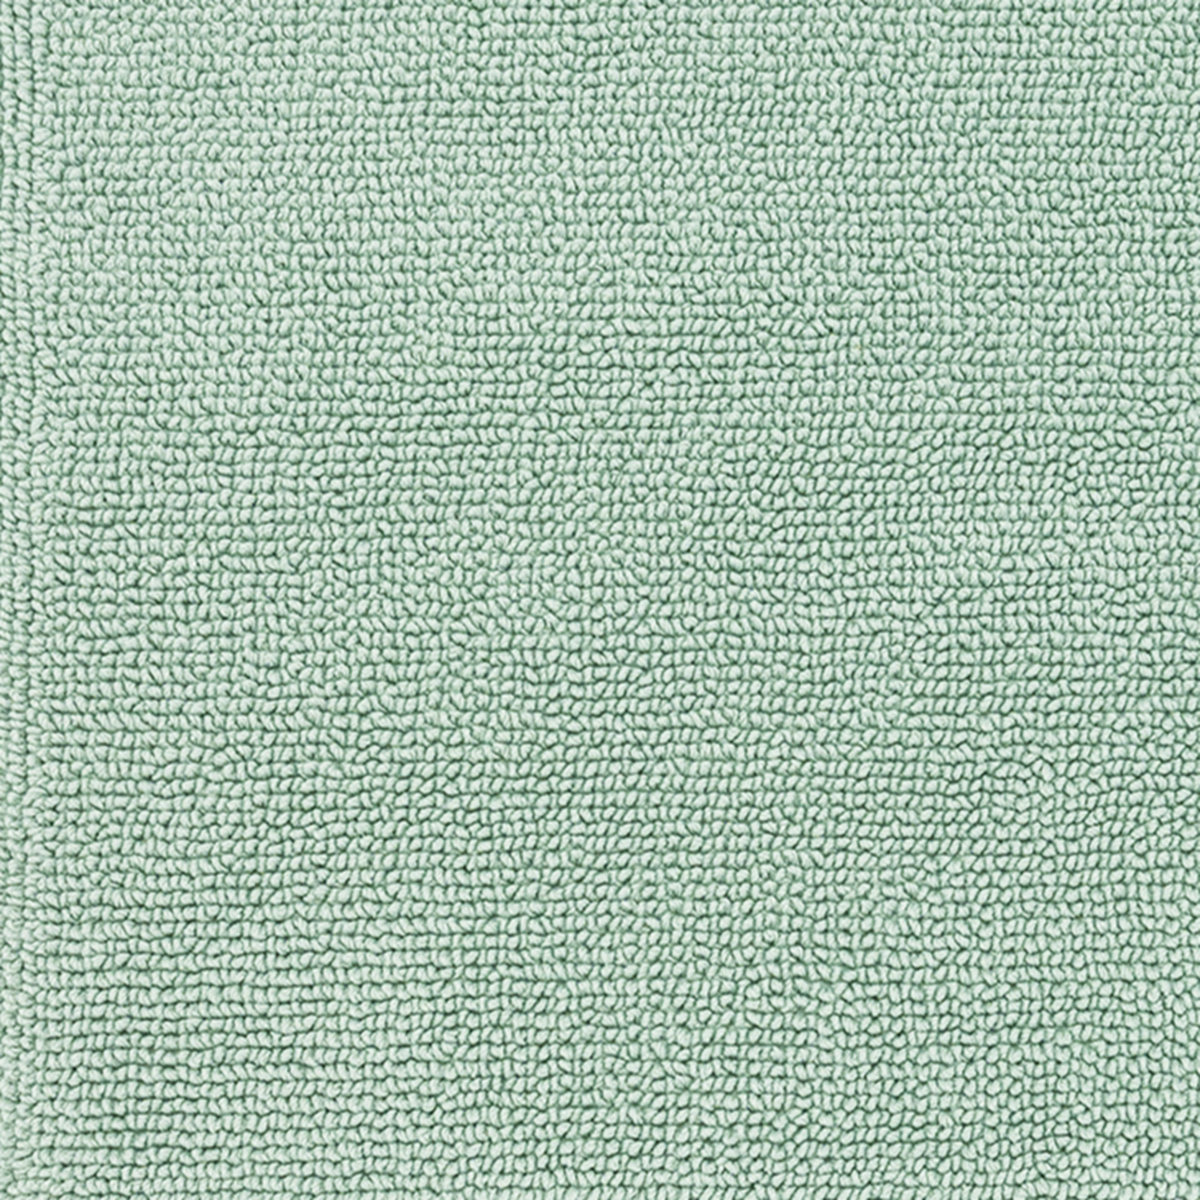 Swatch Sample of Abyss Habidecor Bay Bath Rugs in Color Aqua (210)